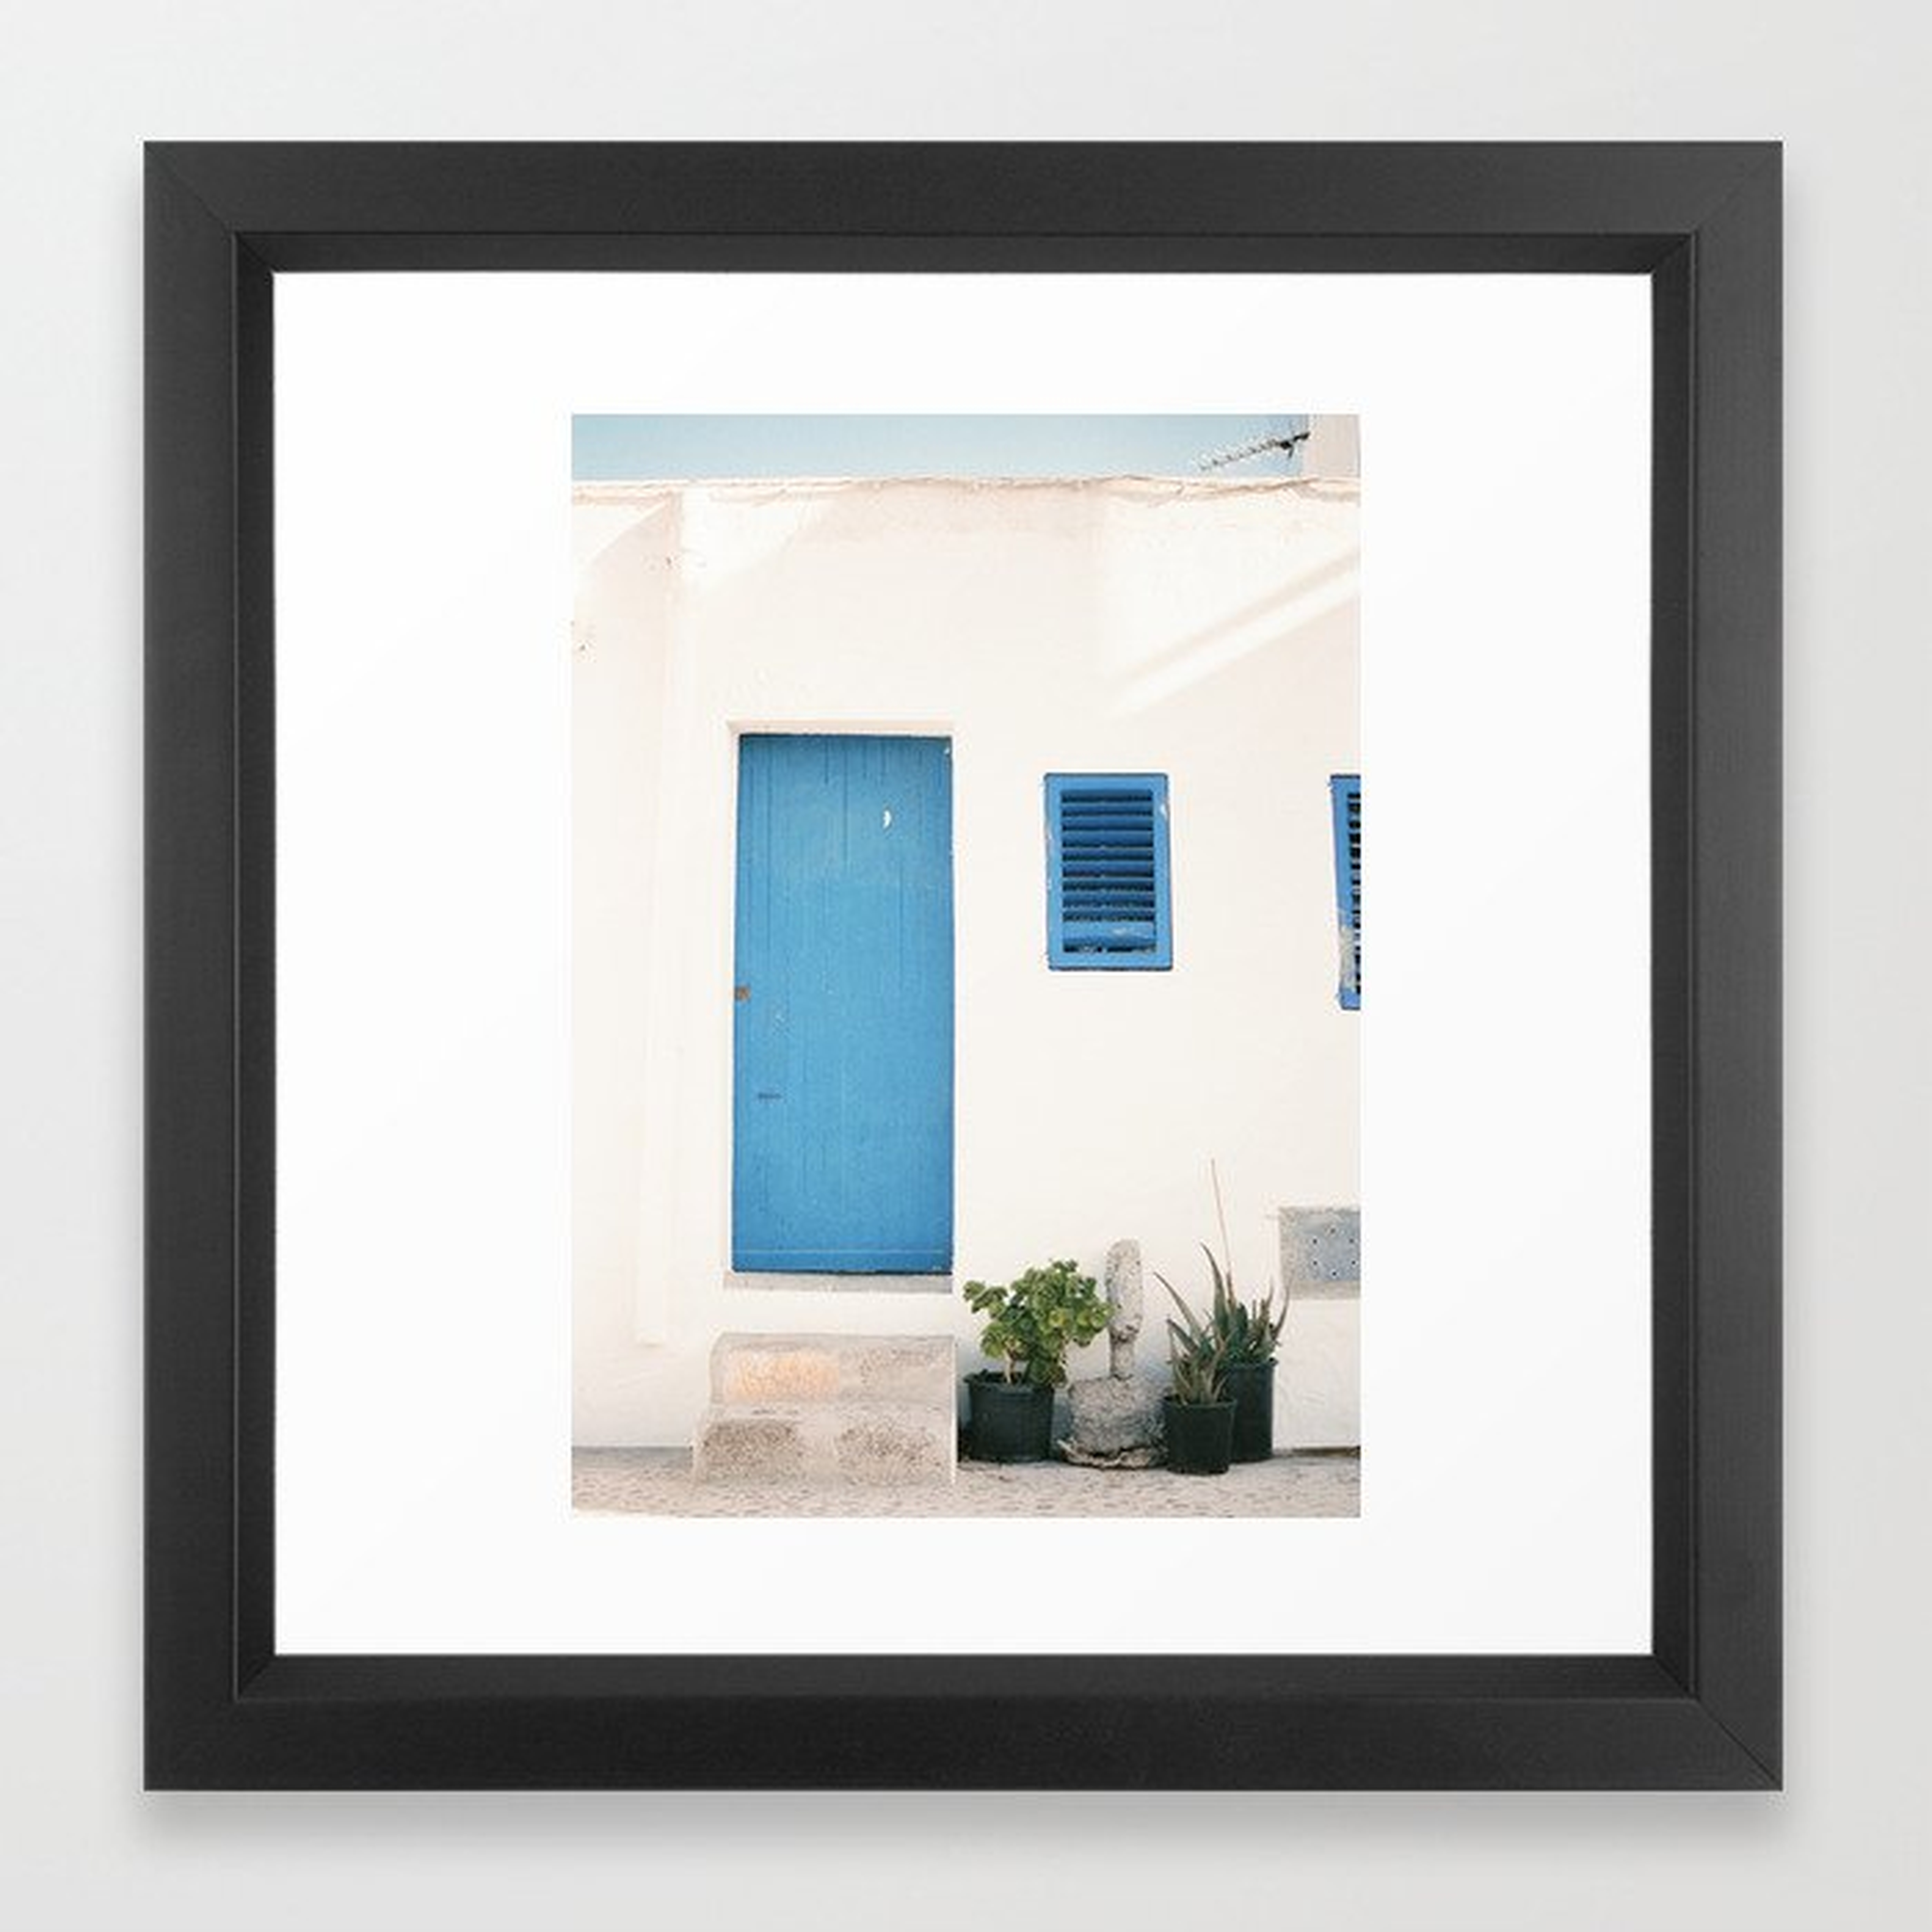 Travel photography print “Ibiza blue and white” photo art made in the old town of Eivissa / Ibiza Framed Art Print - Society6